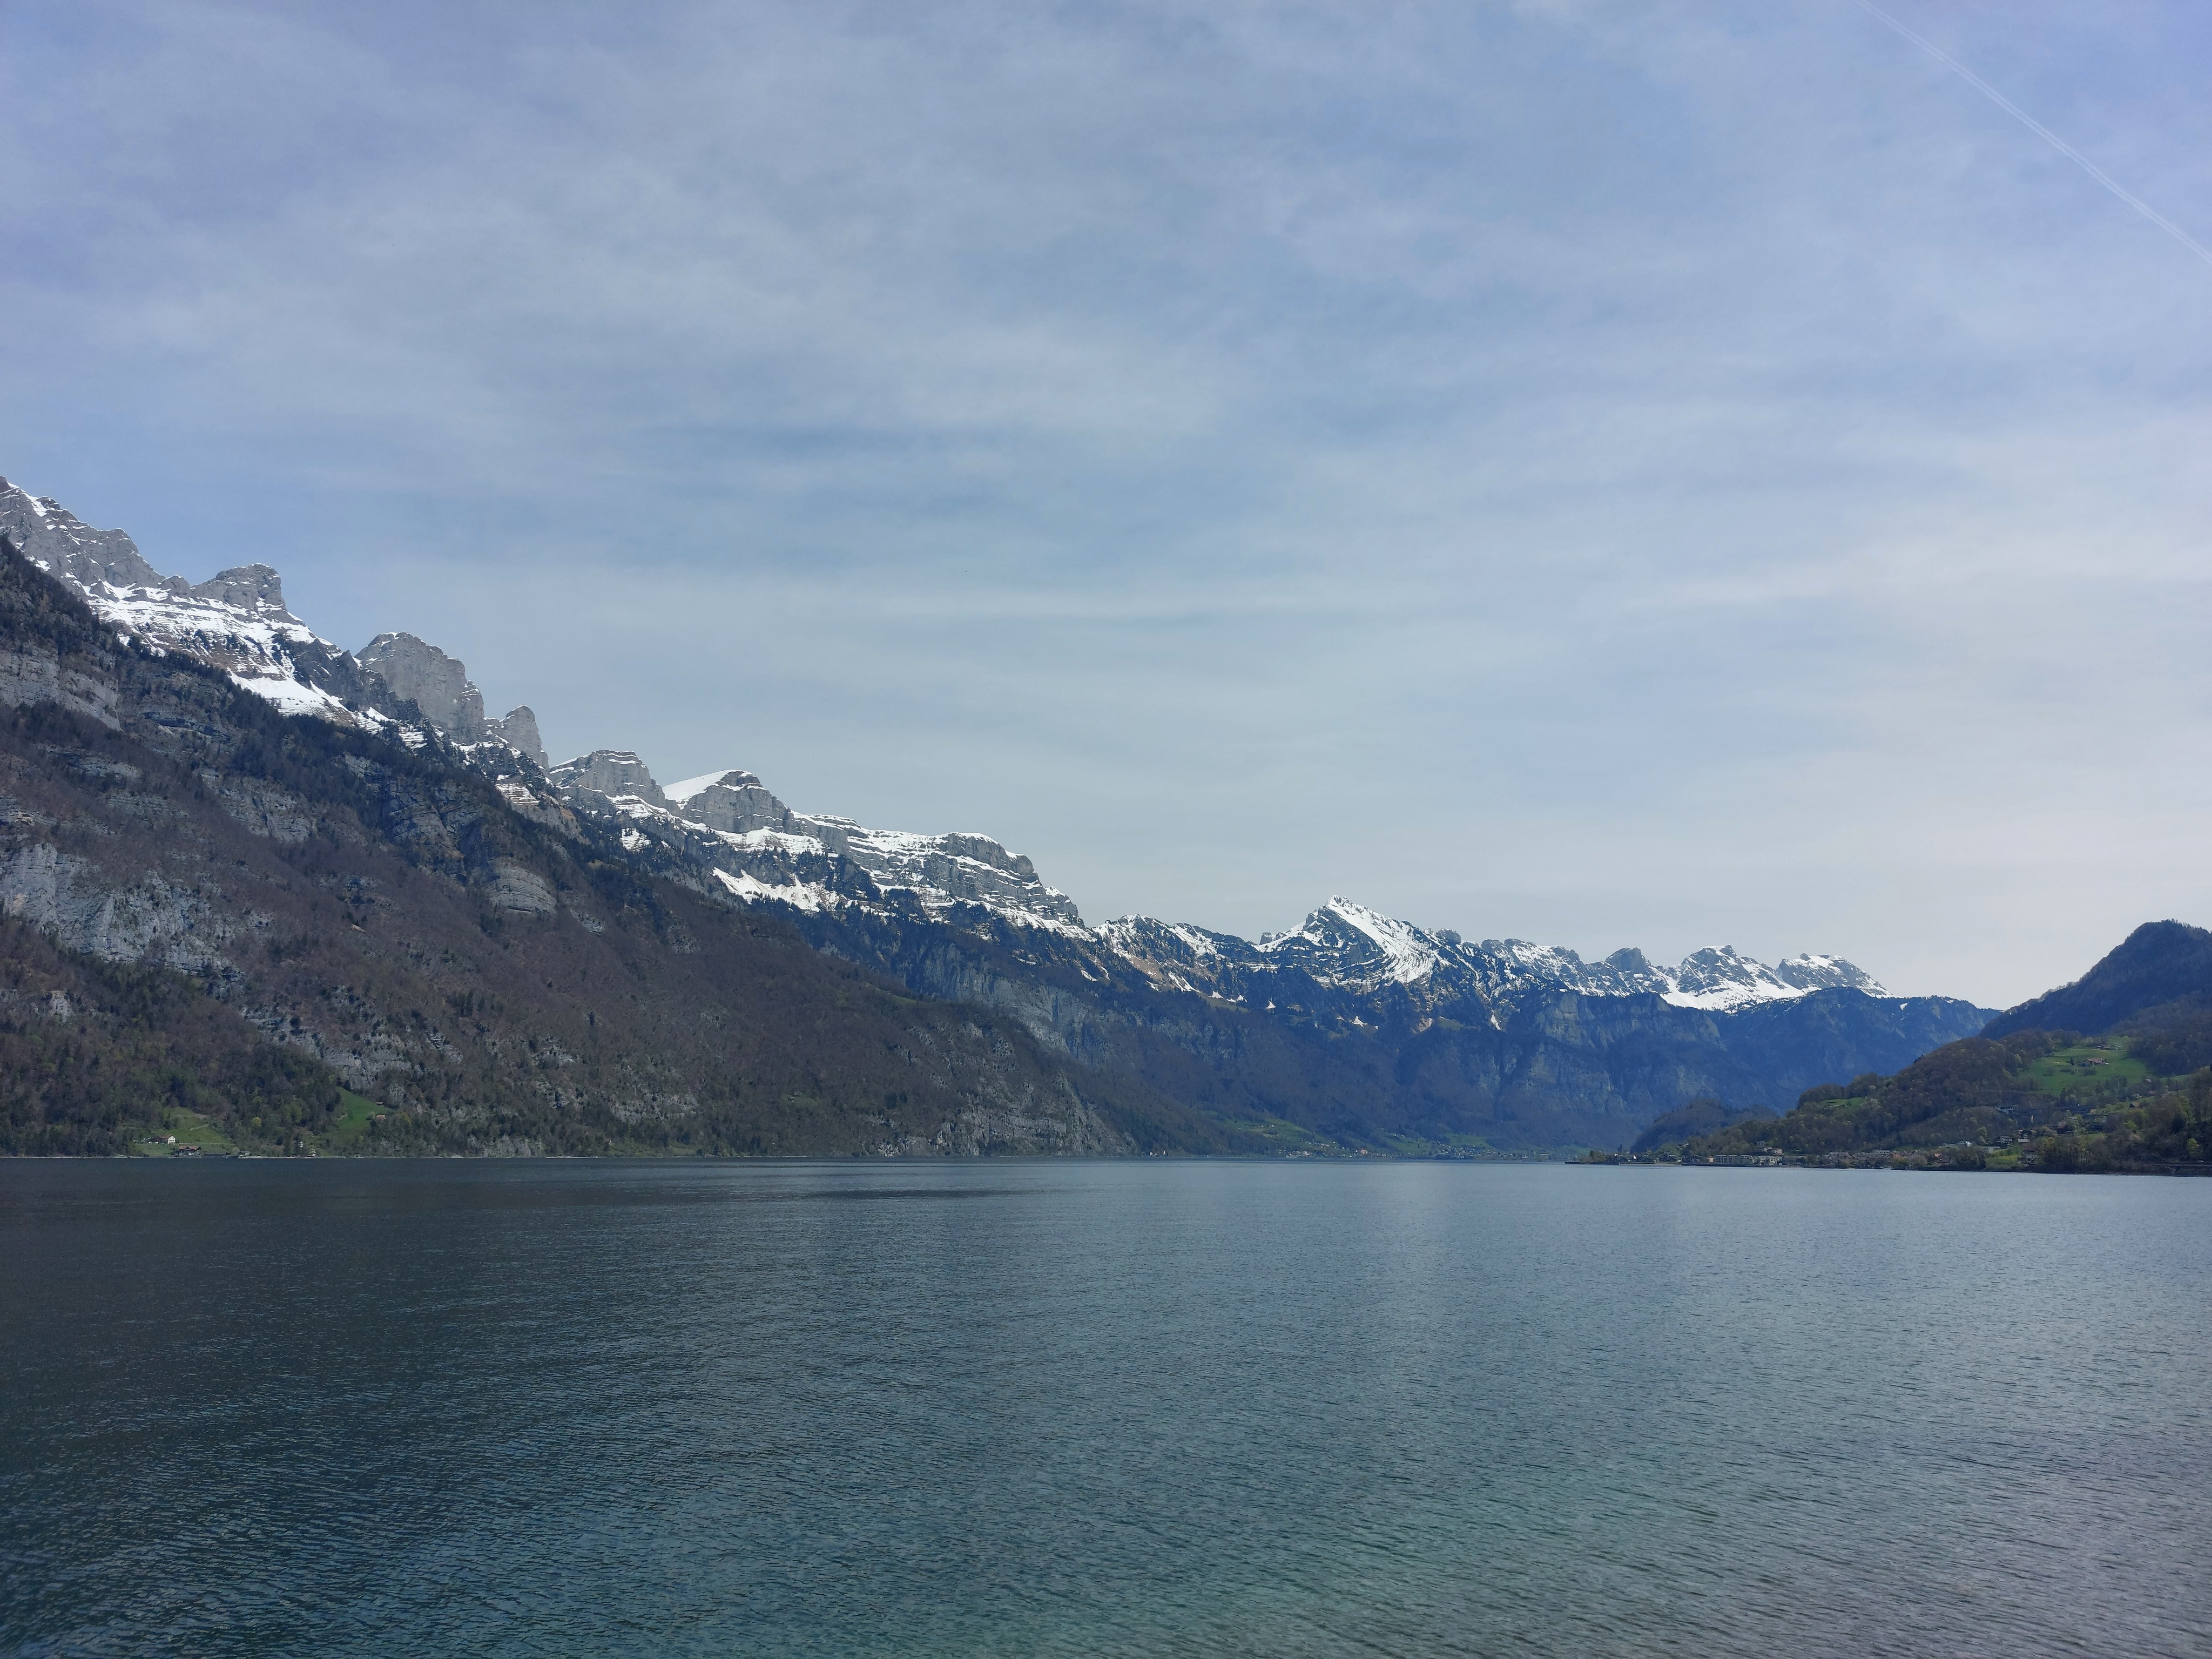 Looking east from Murg towards Walenstadt, glacier-carved mountains behind the lake